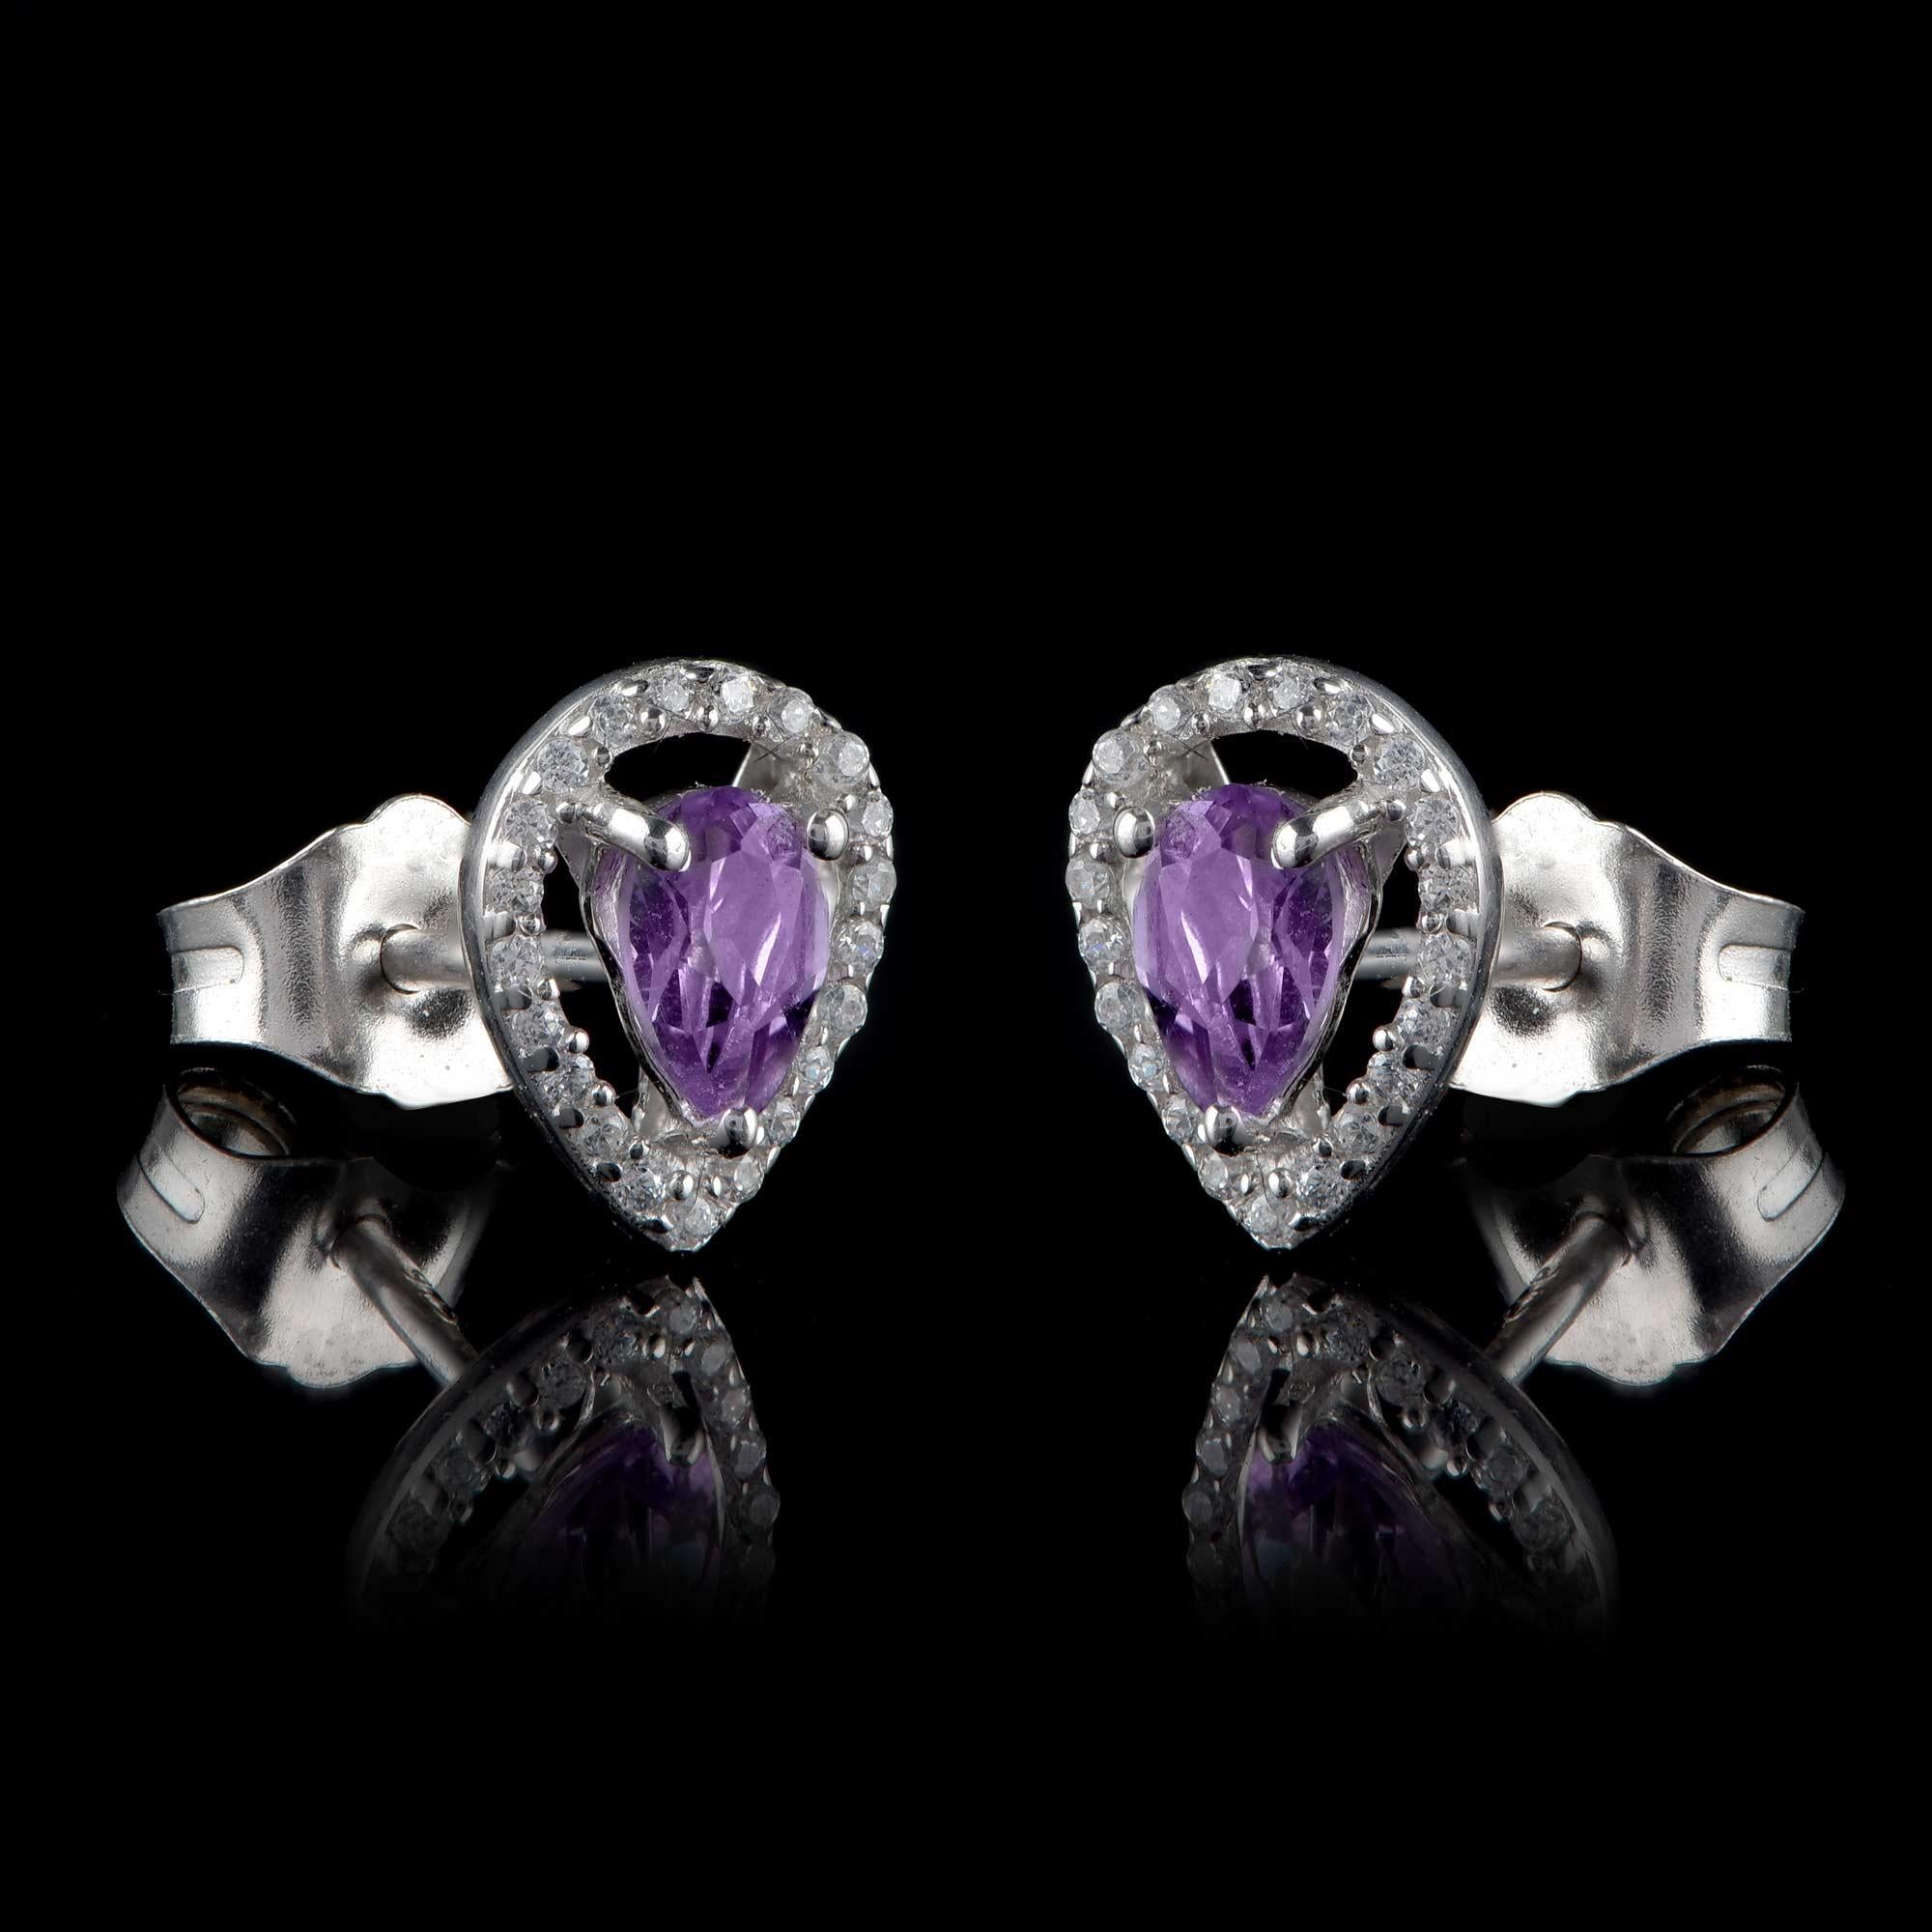 These dainty diamond and gemstone earrings are crafted in 18-karat white gold. The stud earrings are embellished with 42 brilliant cut diamonds and 2 amethysts in prong setting. The diamonds are graded H-I Color, I2 Clarity. Locks comfortably with